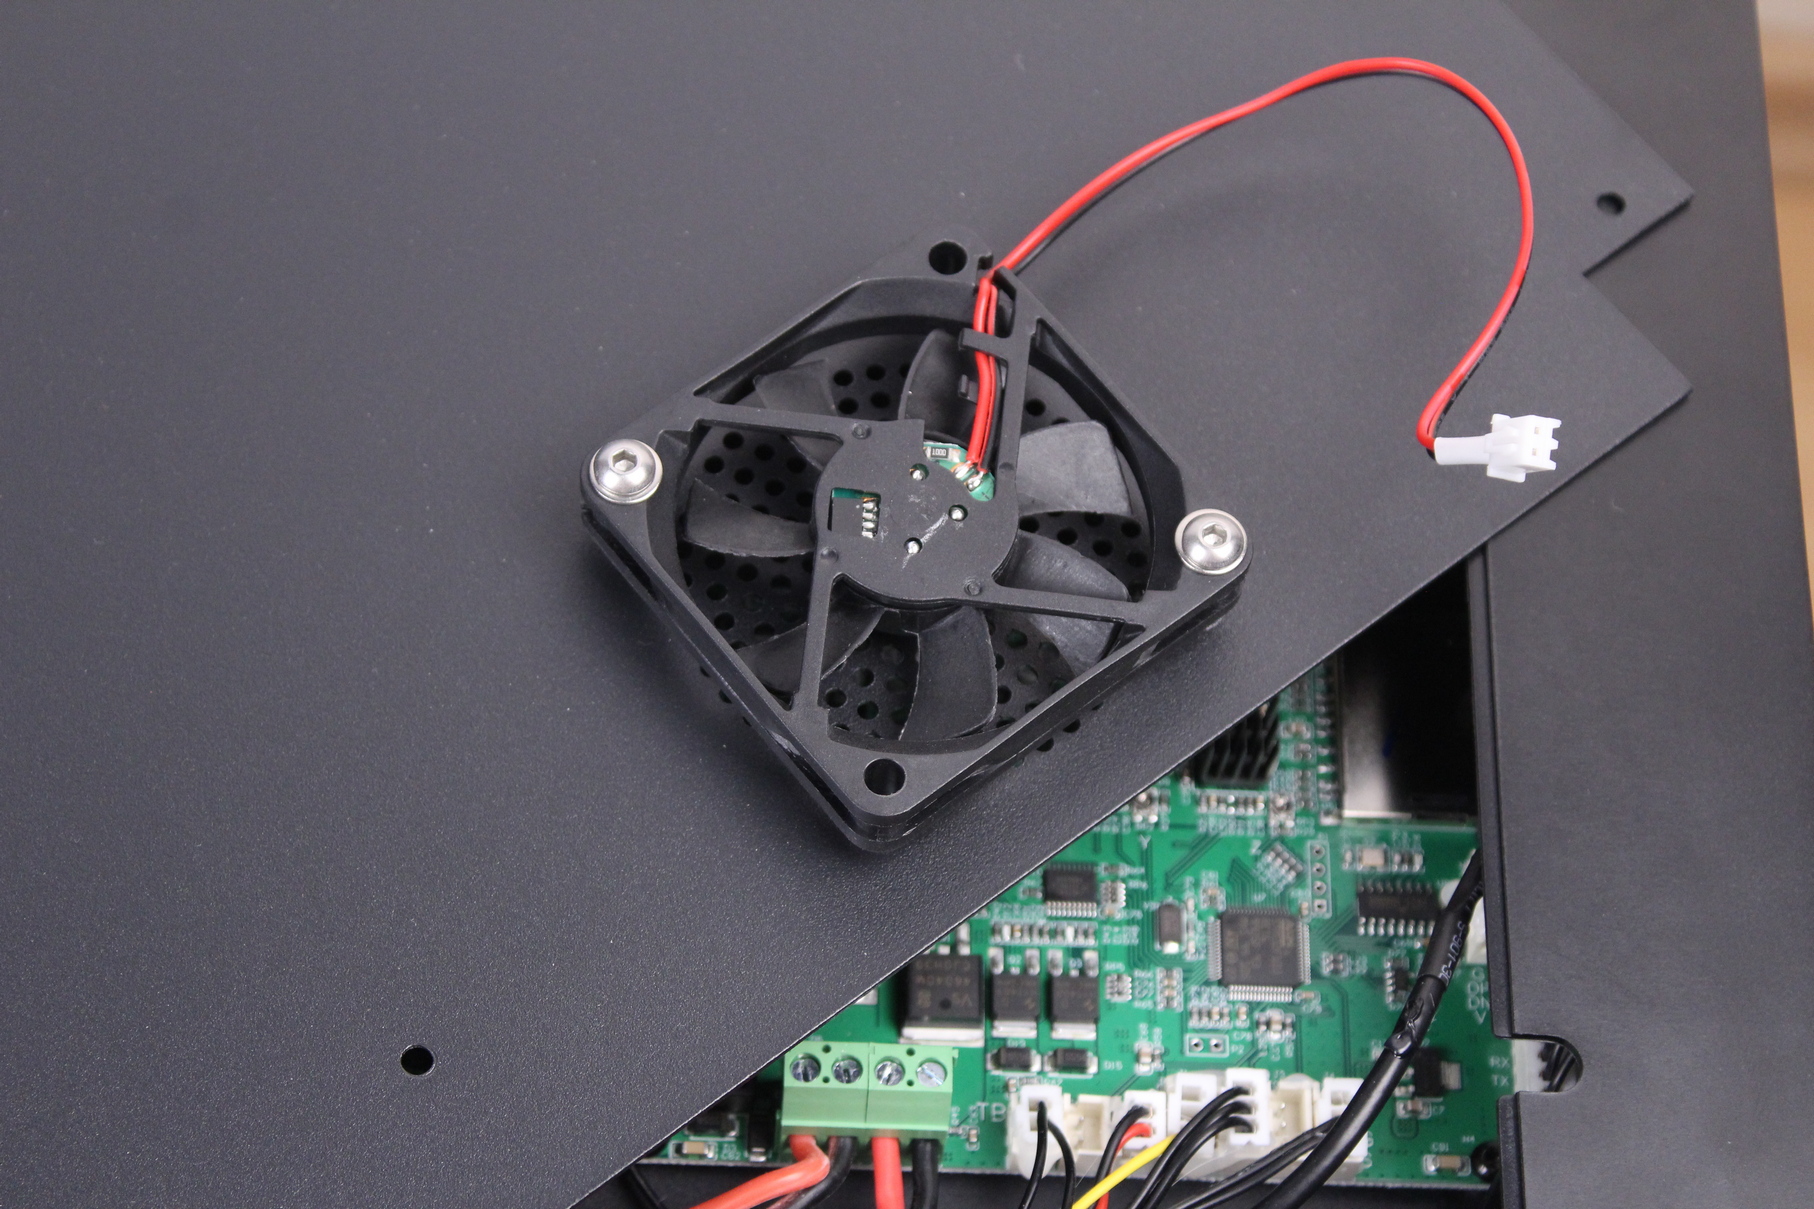 Cooling fan for Creality CR 10 Smart board | Creality CR-10 Smart Review: How smart it really is?